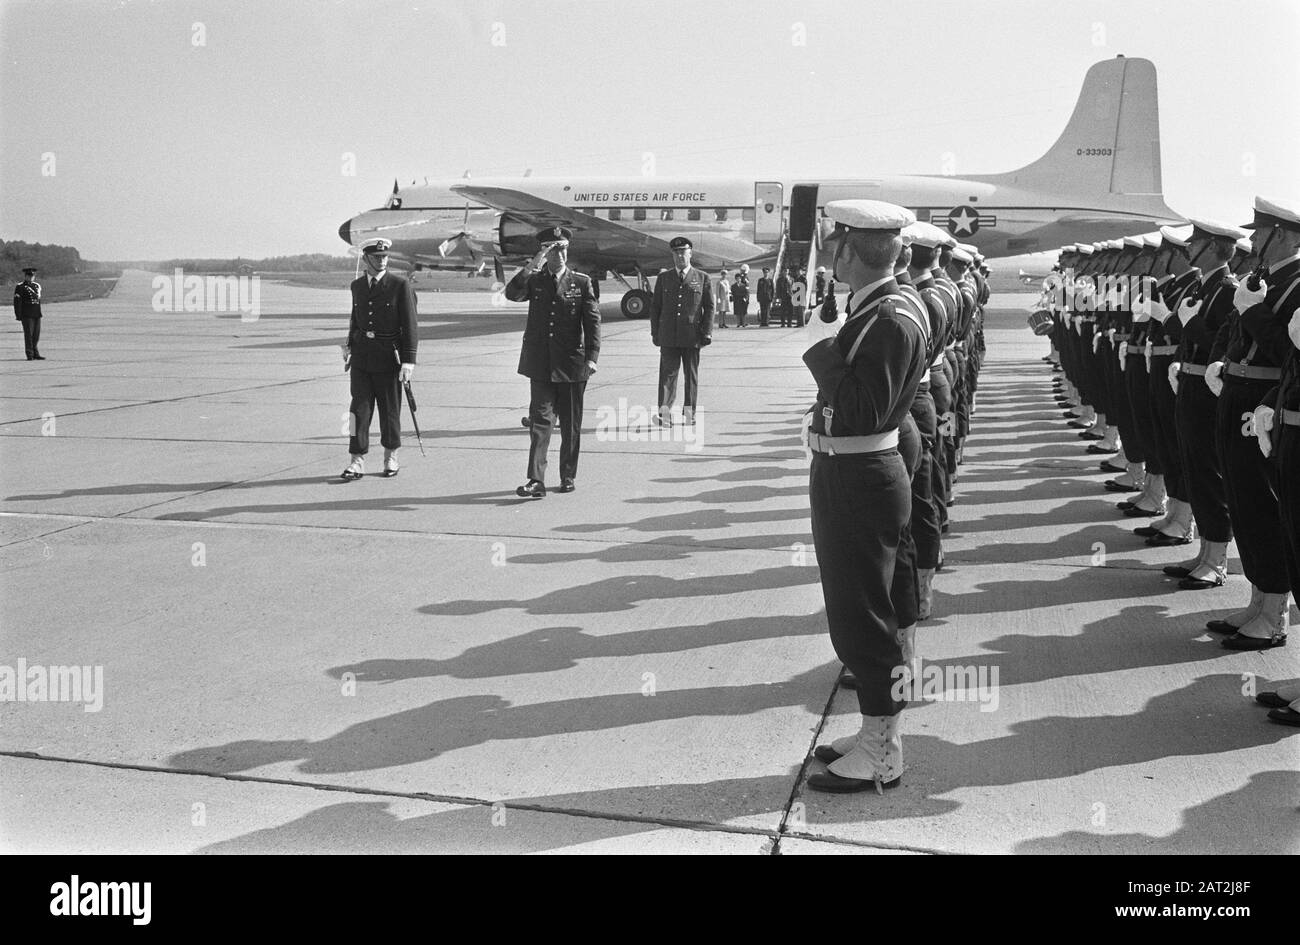 General A. J. Goodpaster, Commander-in-Chief of the Allied Armed Forces in Europe, arrives at Ypenburg: Gen. Goodpaster inspects the honorary guard Date: 8 September 1969 Location: The Hague, Ypenburg, Zuid-Holland Keywords: honorary guards, generals, commanders in chief Stock Photo